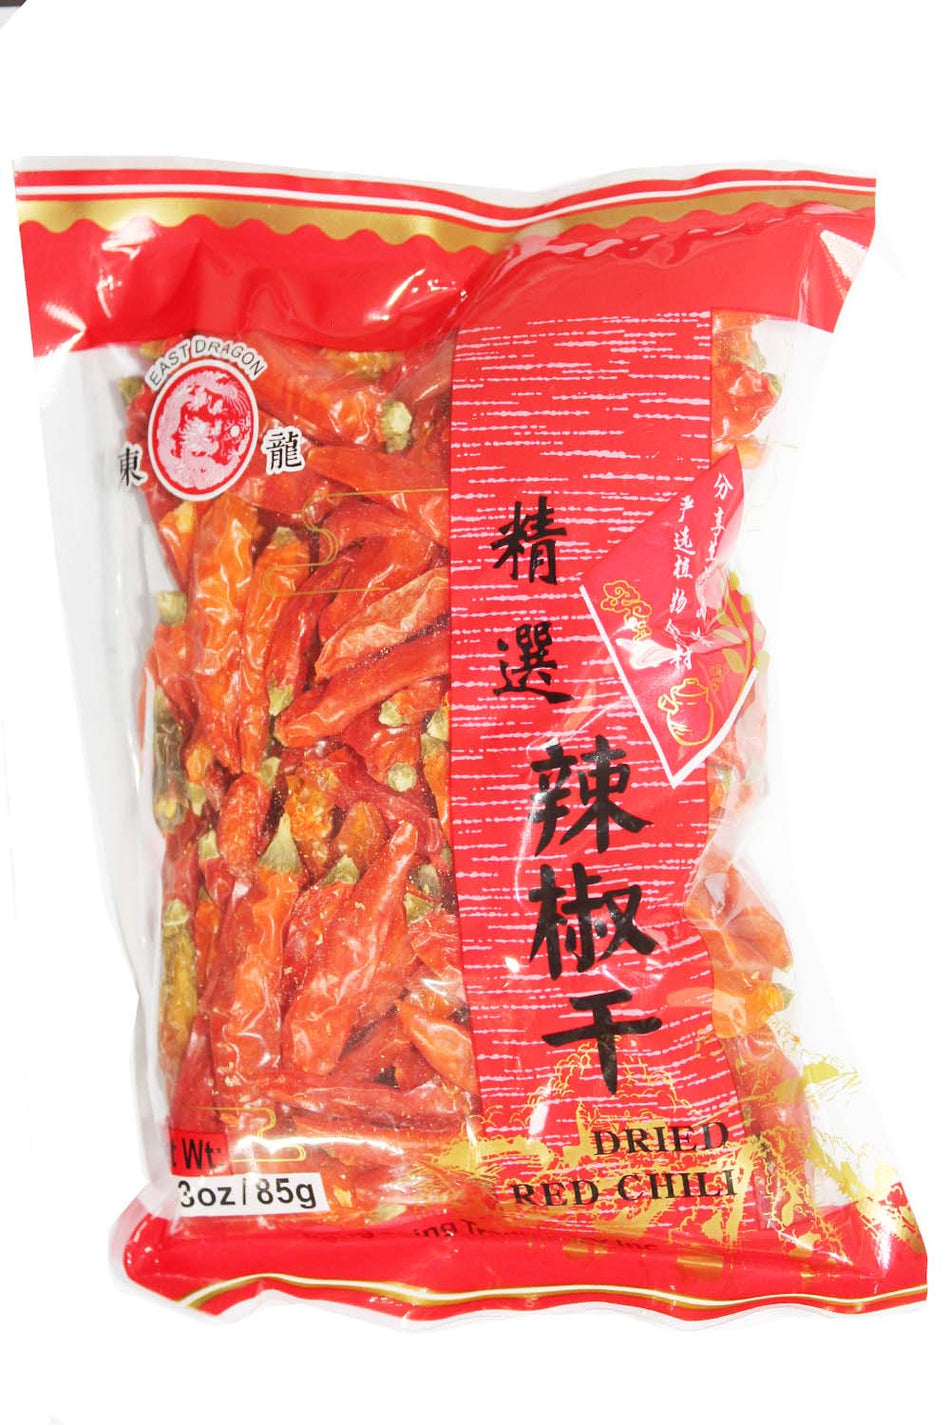 East Dragon Dried Red Chili